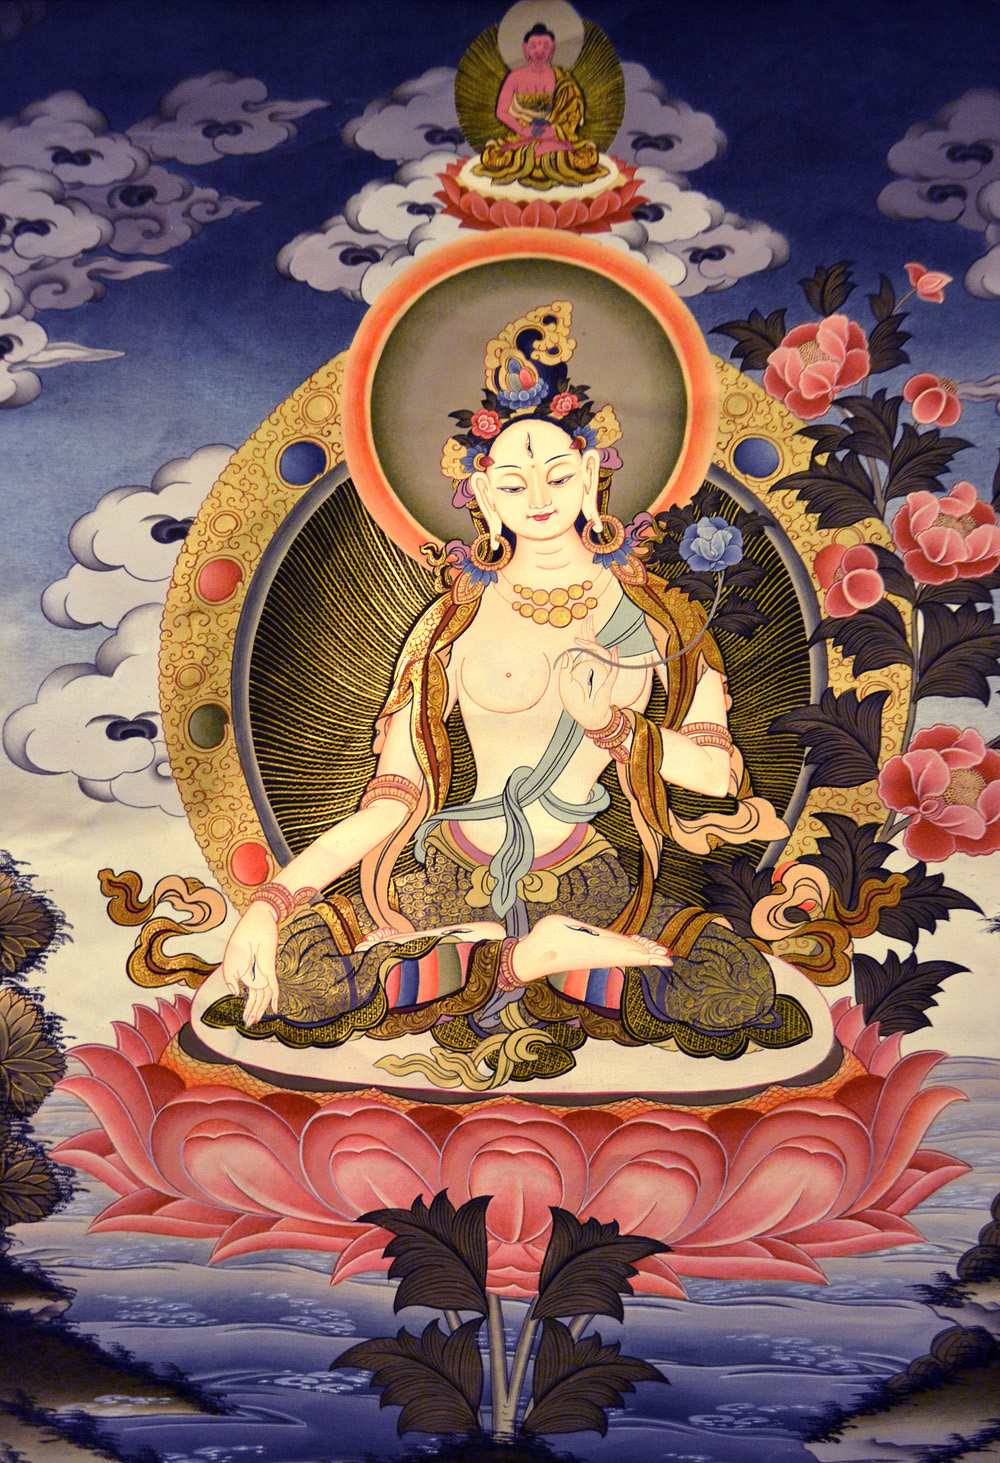 White Tara is the main female Bodhisattva, traditionally associated with the lotus. White Tara in Vegetka is displayed in the lotus position with seven eyes (the eyes, forehead, hands and feet), symbolizing the vision of all the earth, and the ability to help all feeling beings. Photo: Barbora Sajmovicova, 2016, Prague.